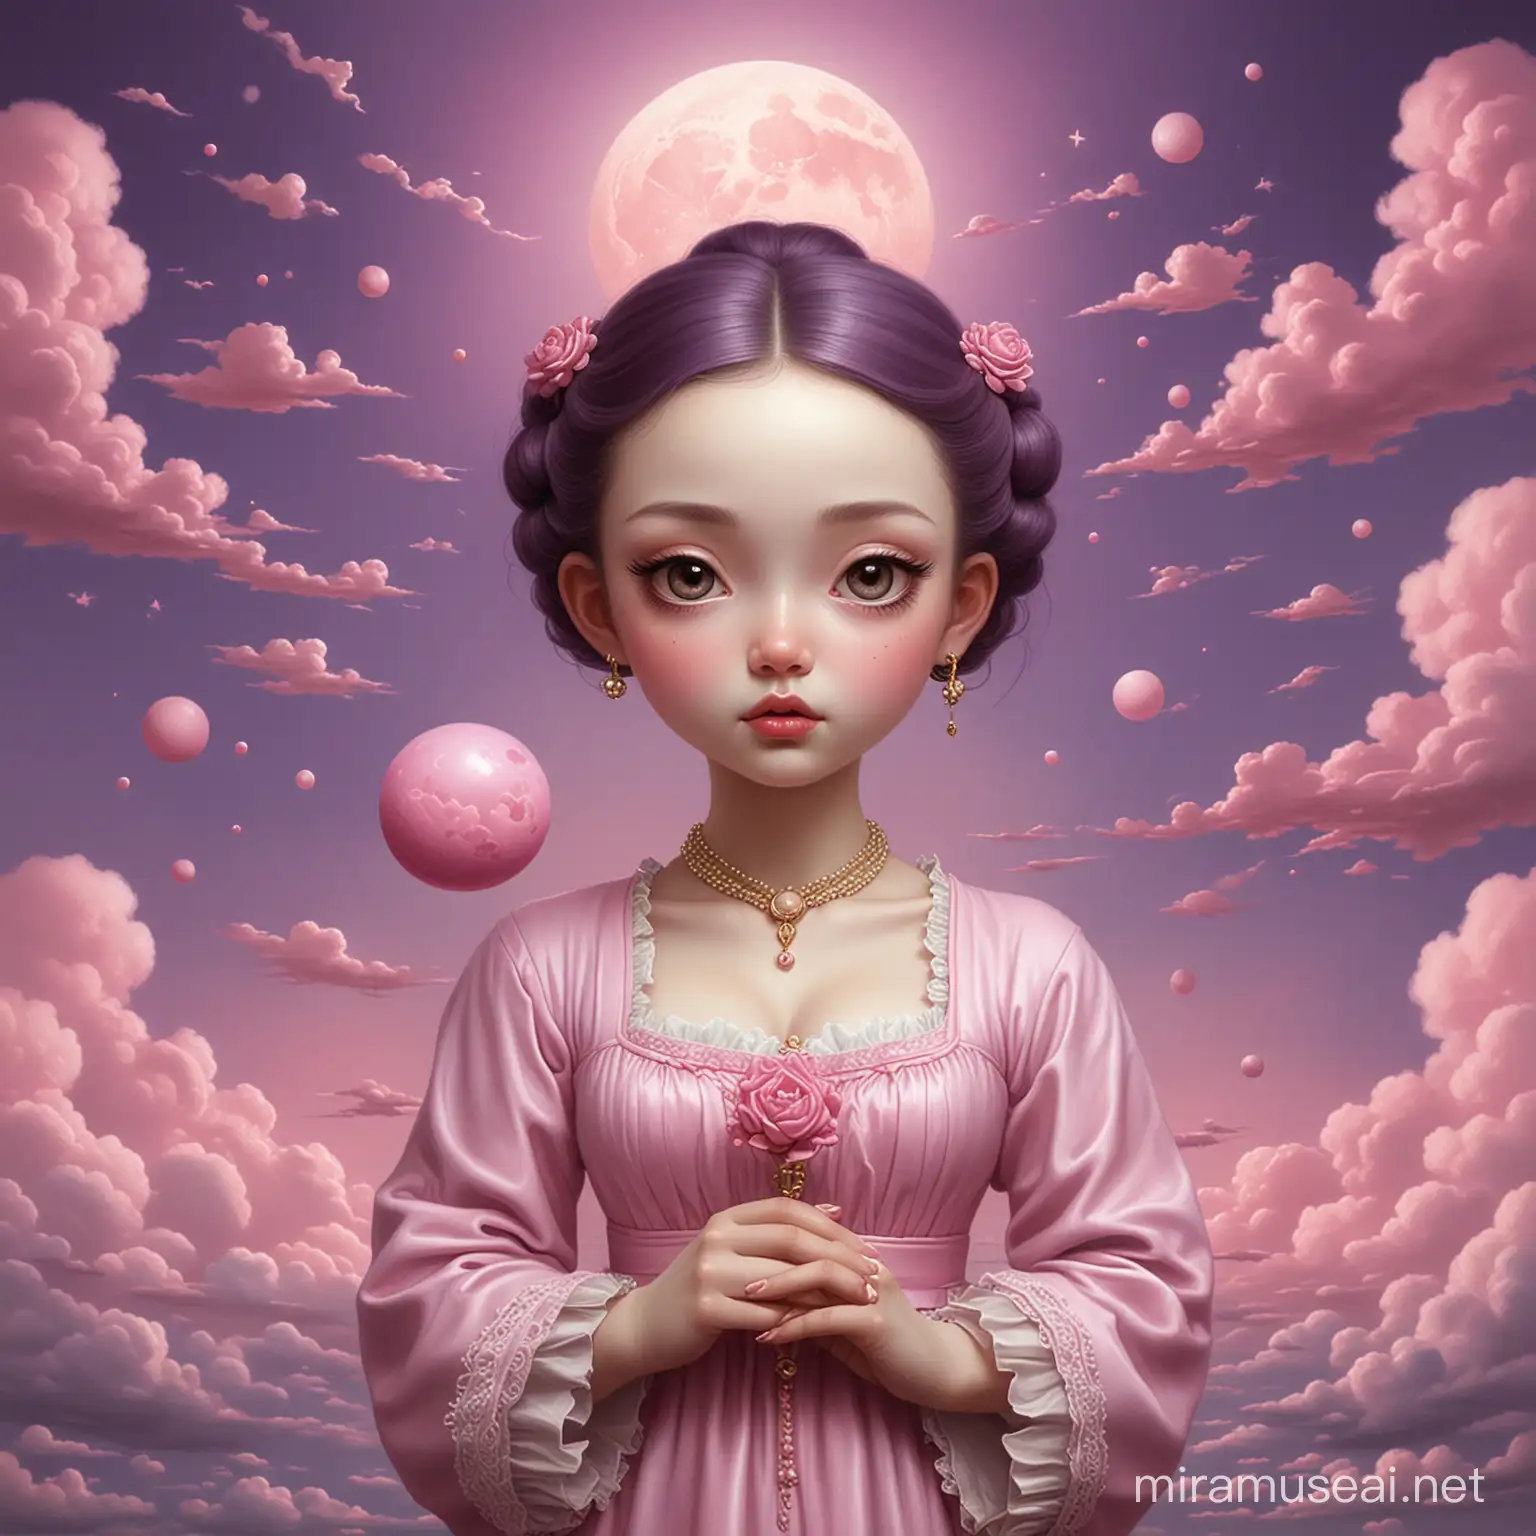 Prostitute Holding Moon under Purple Sky Inspired by Mark Ryden